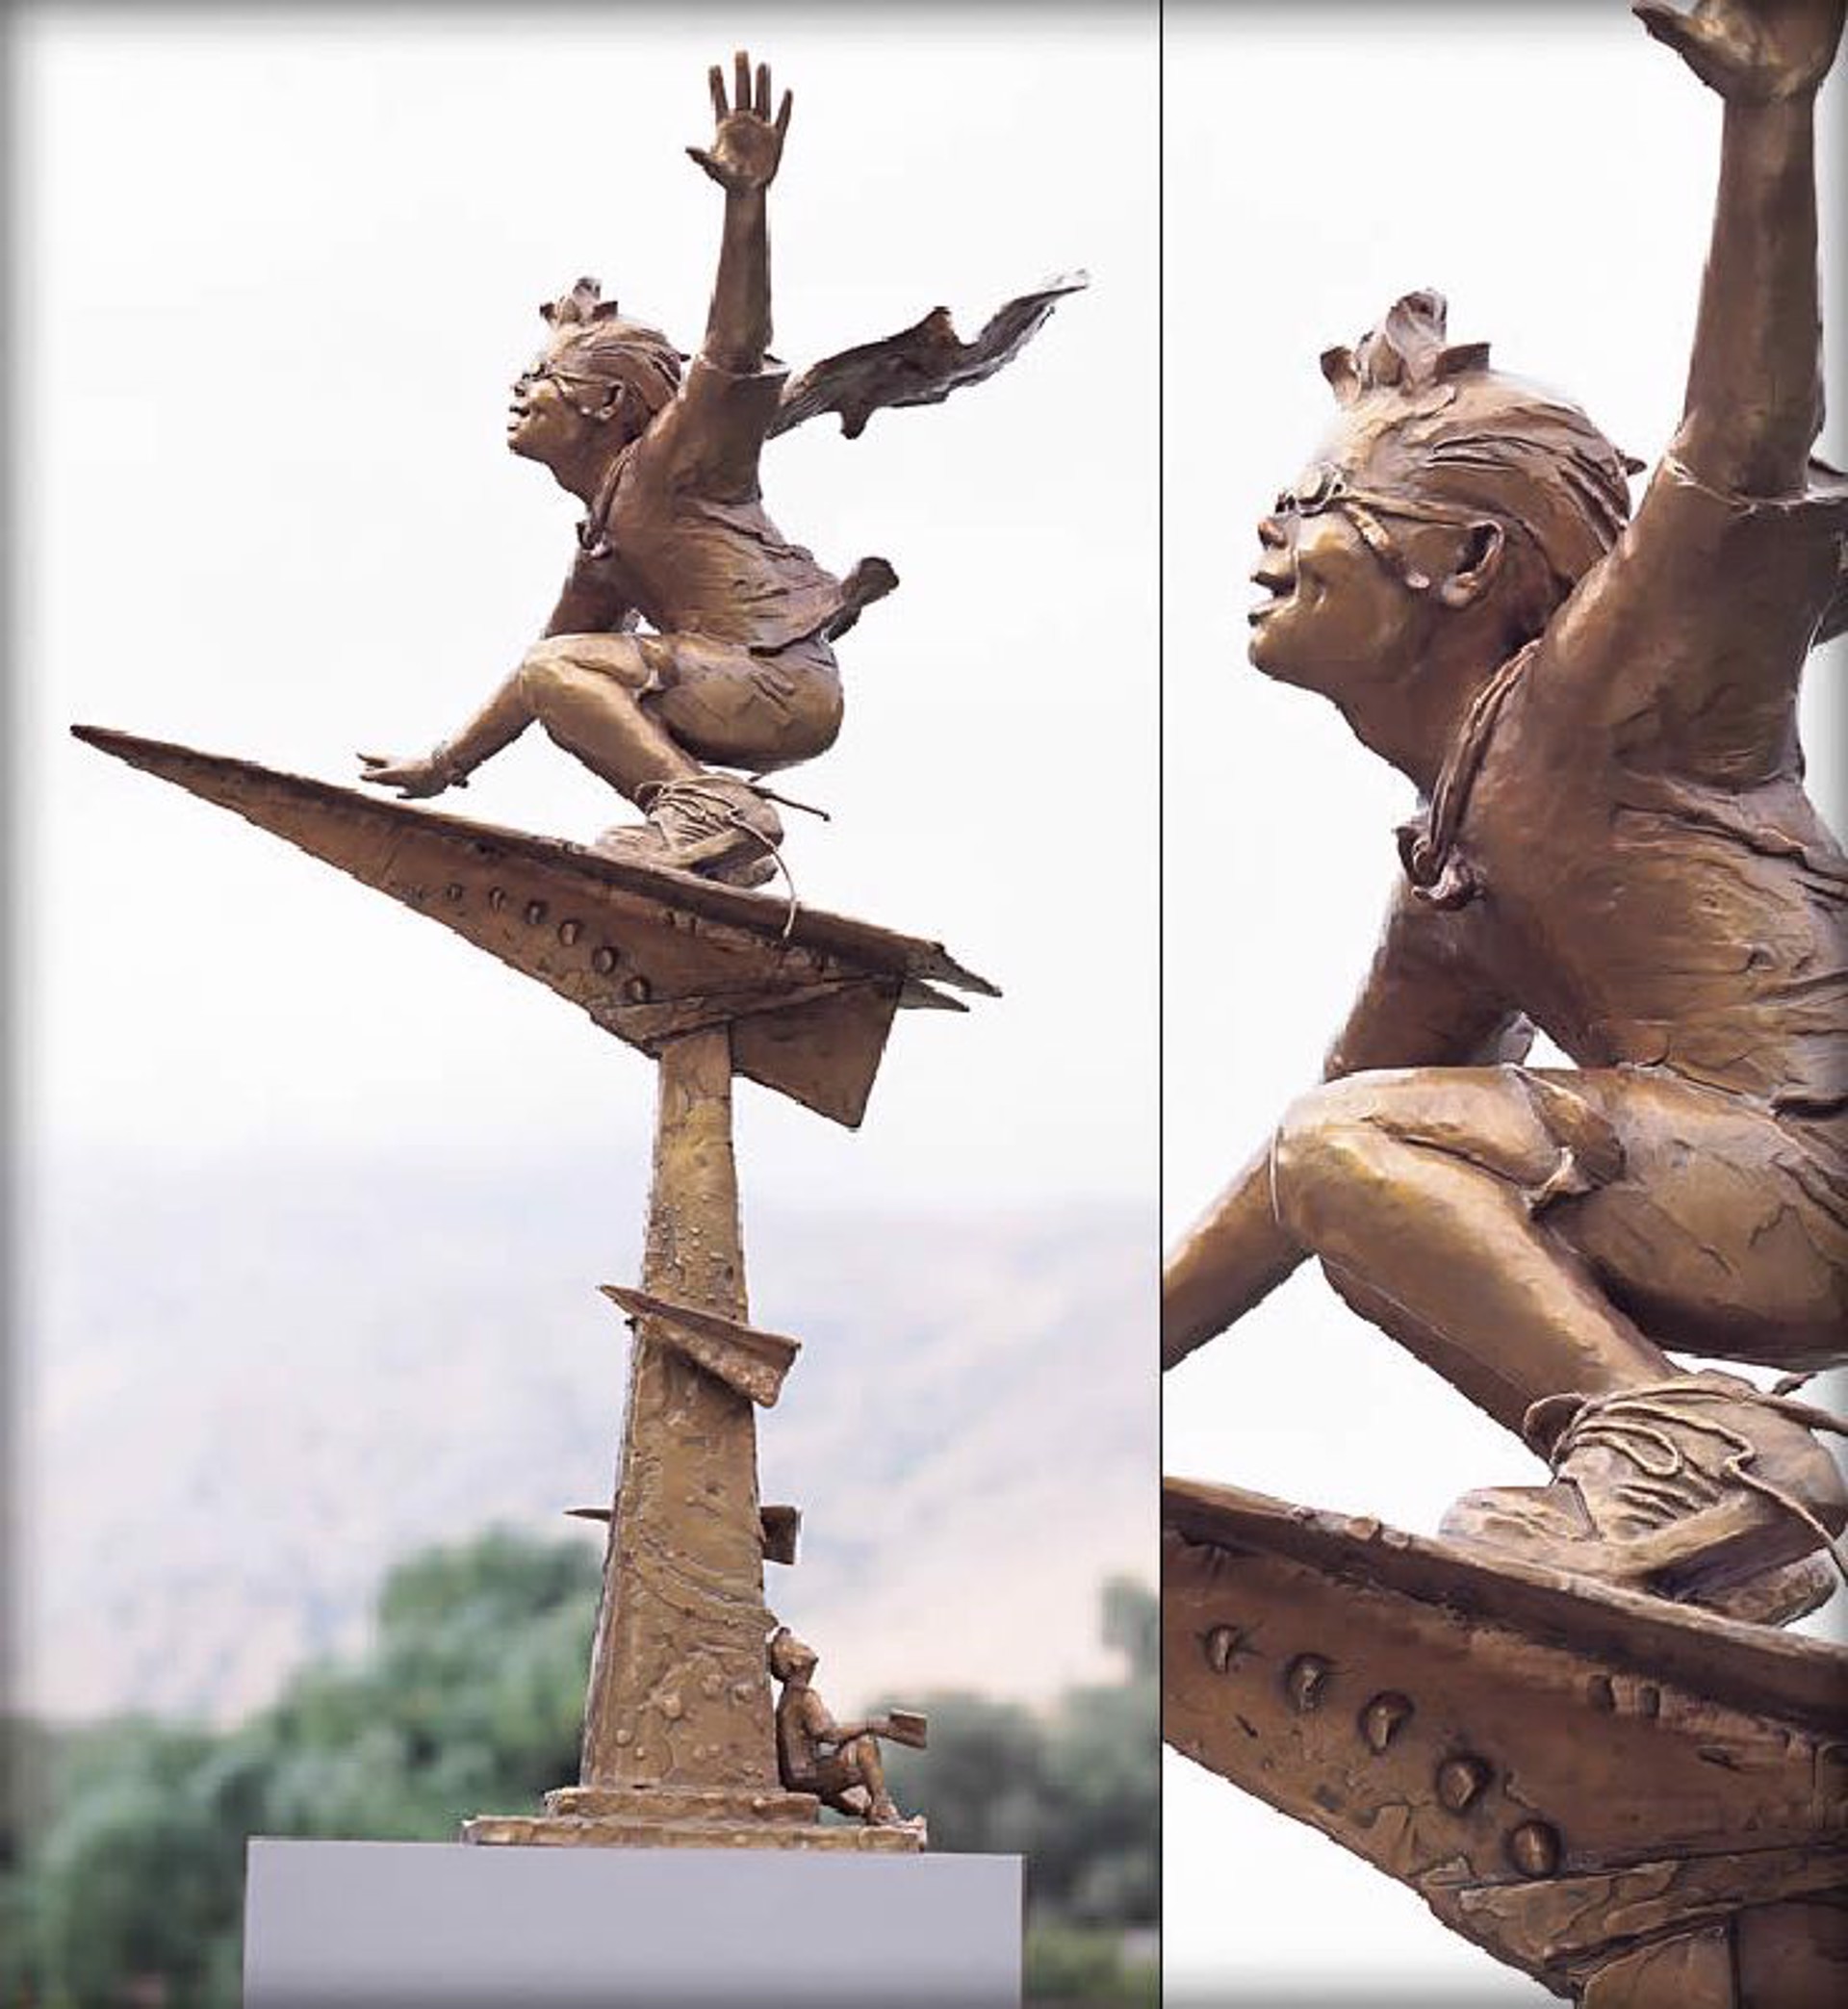 Journeys of the Imagination by Gary Lee Price (sculptor)